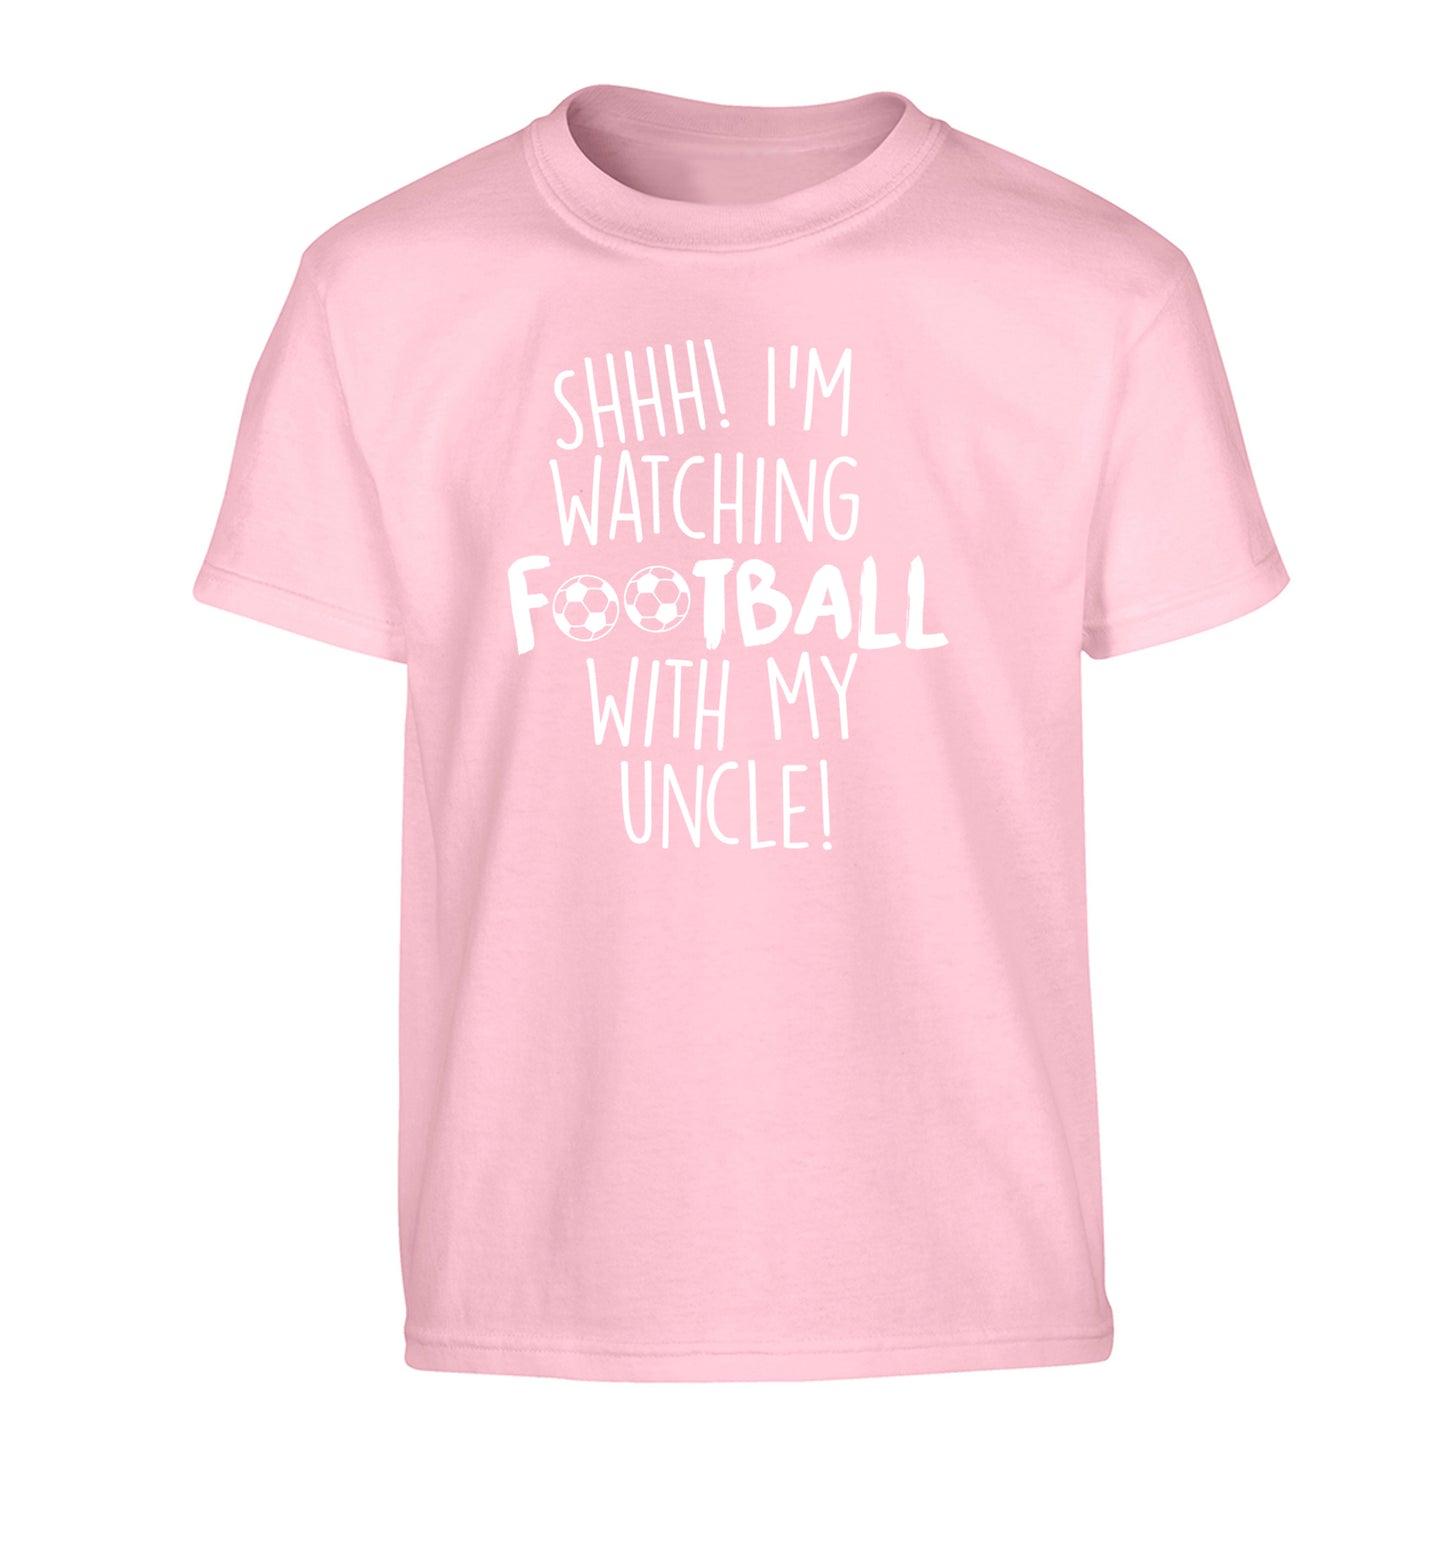 Shhh I'm watching football with my uncle Children's light pink Tshirt 12-14 Years